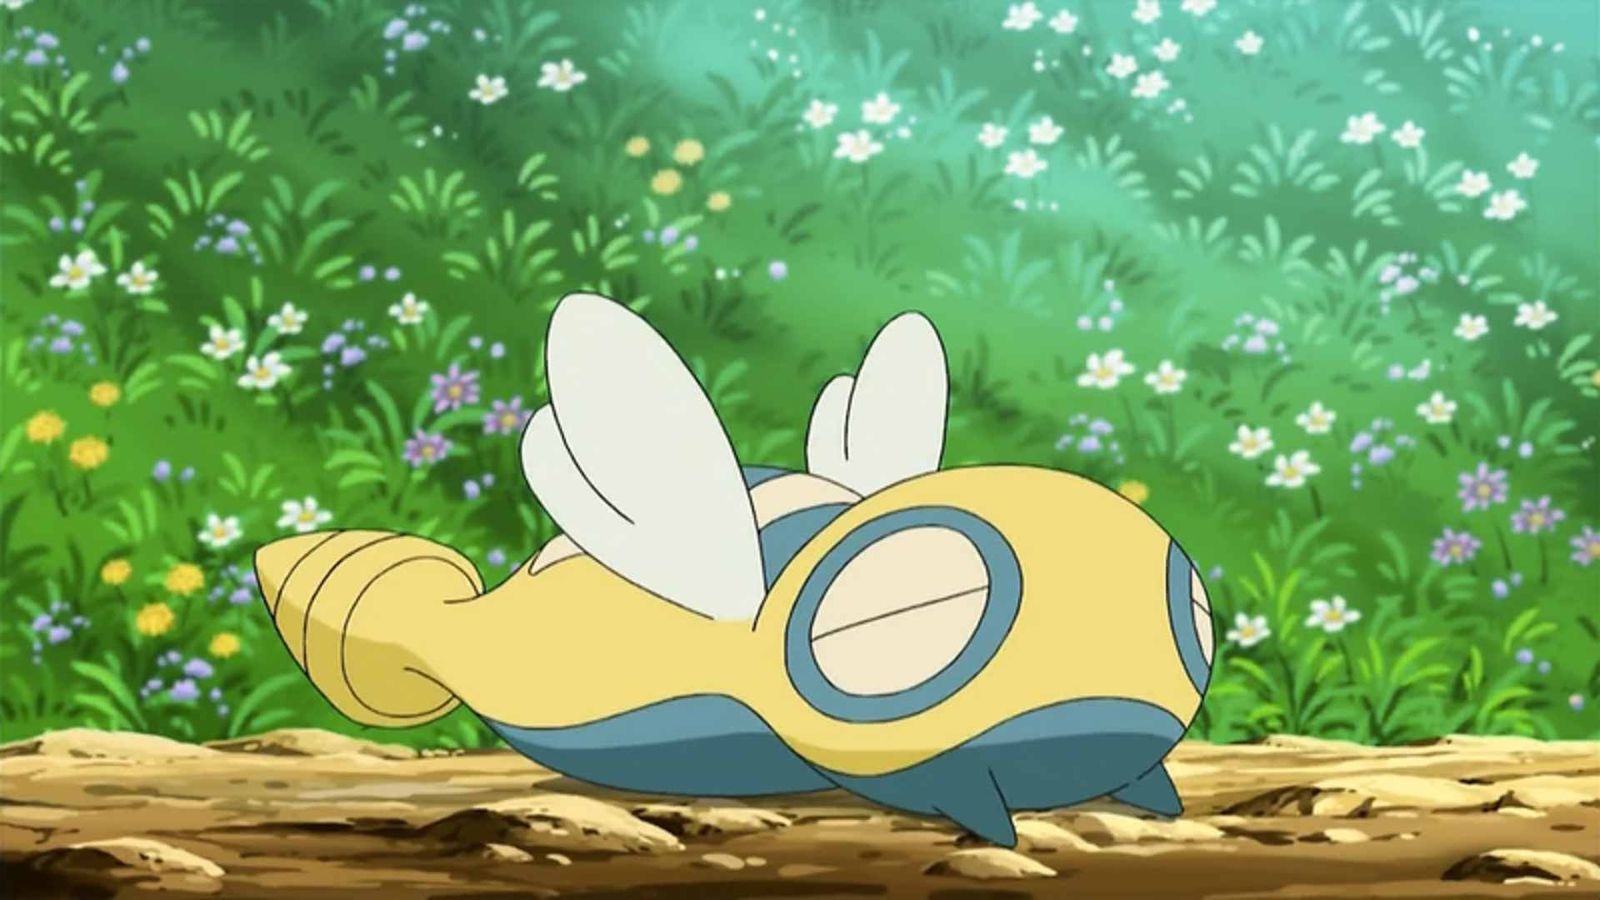 Image of Dunsparce asleep on the ground in the Pokemon anime.